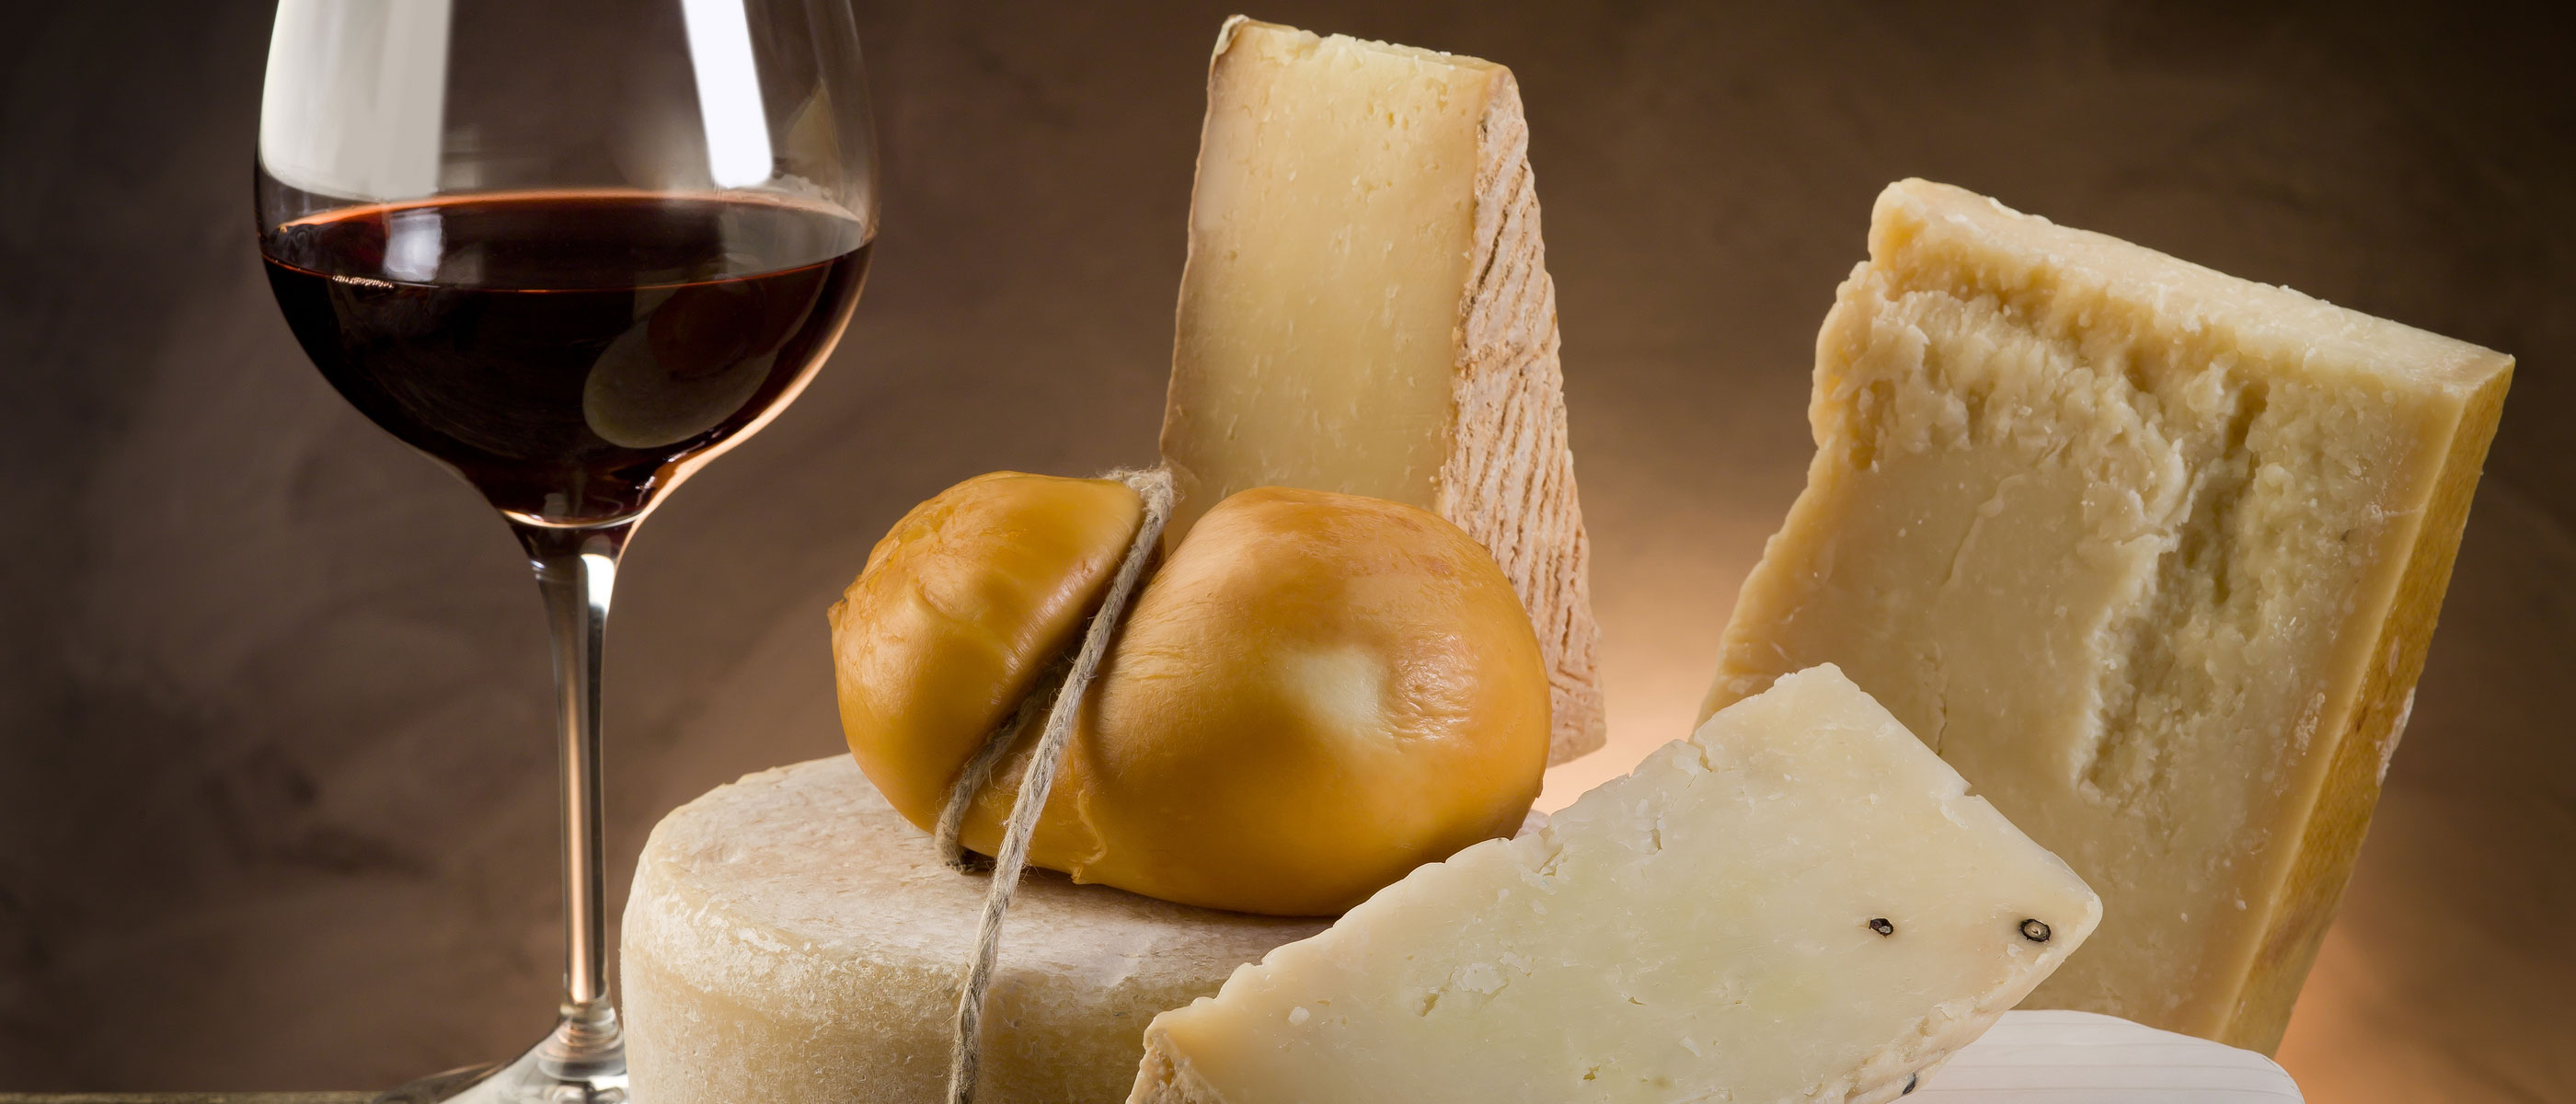 Wine and cheese on your vacation